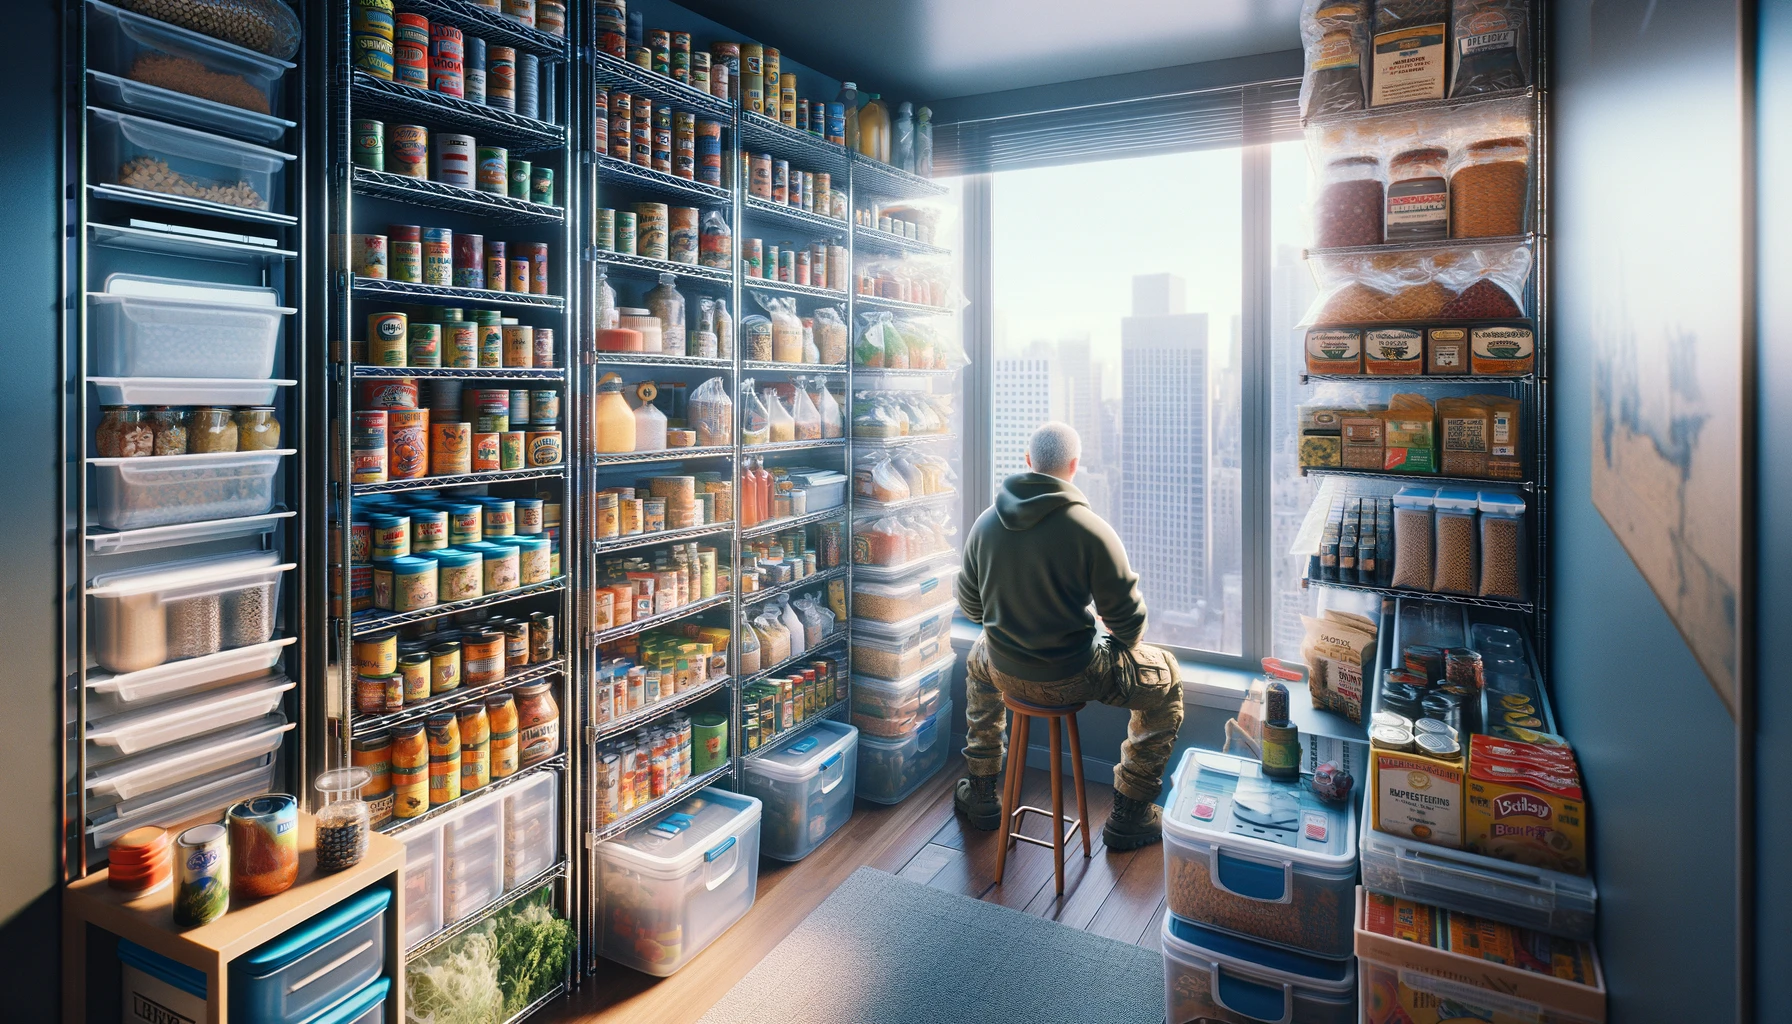 Urban prepper in an apartment organizing food storage with vertical shelving, vacuum-sealed packets, and labeled containers, against a city backdrop